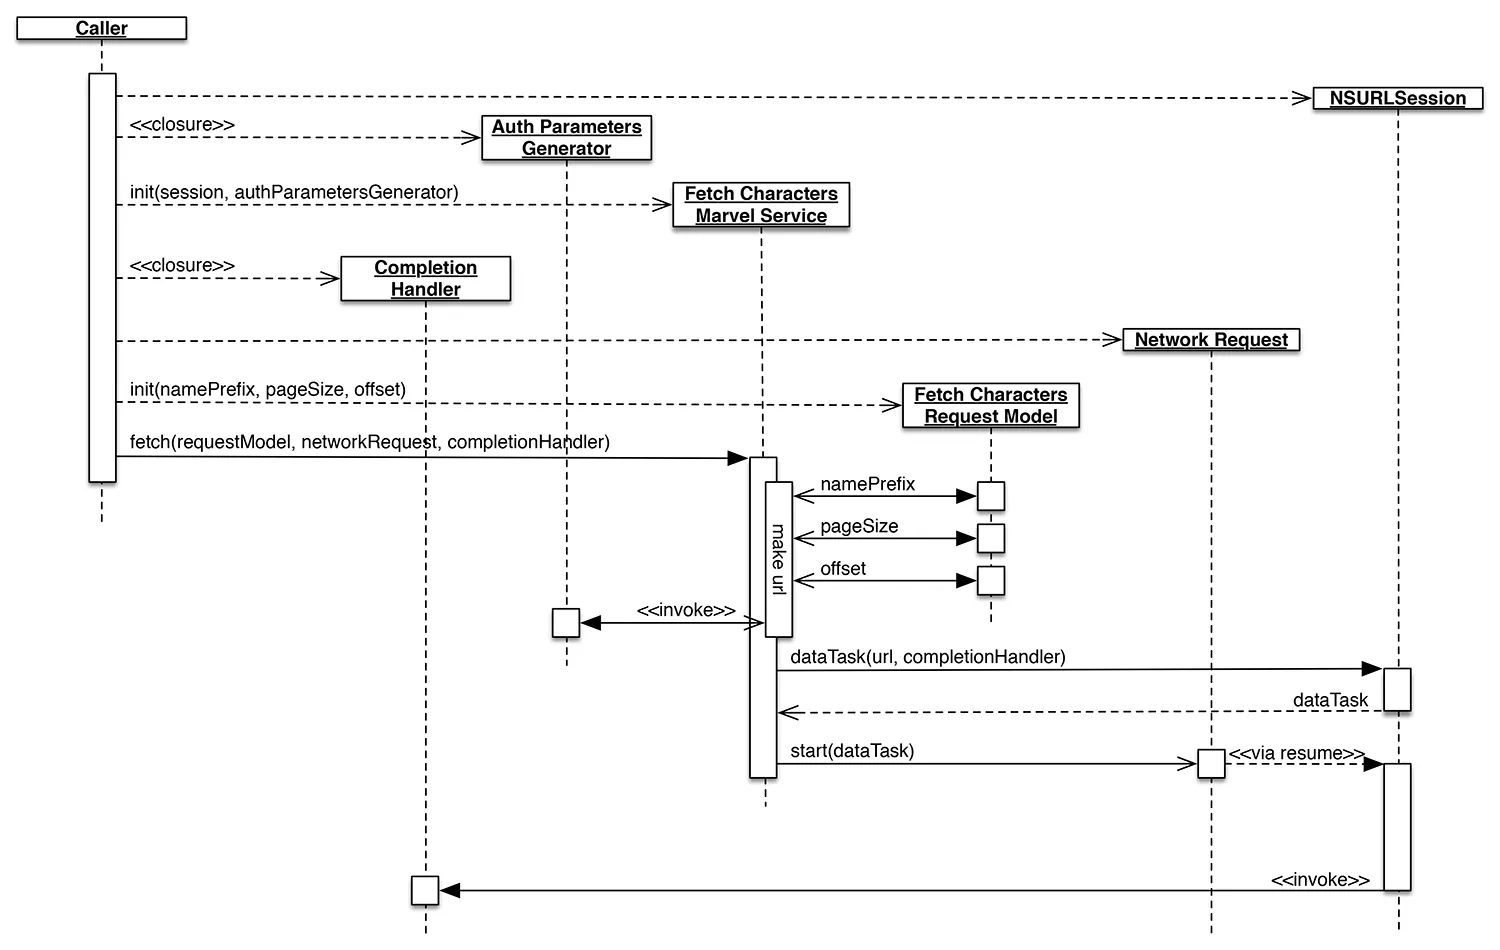 Sequence Diagram for Fetch Characters Marvel Service